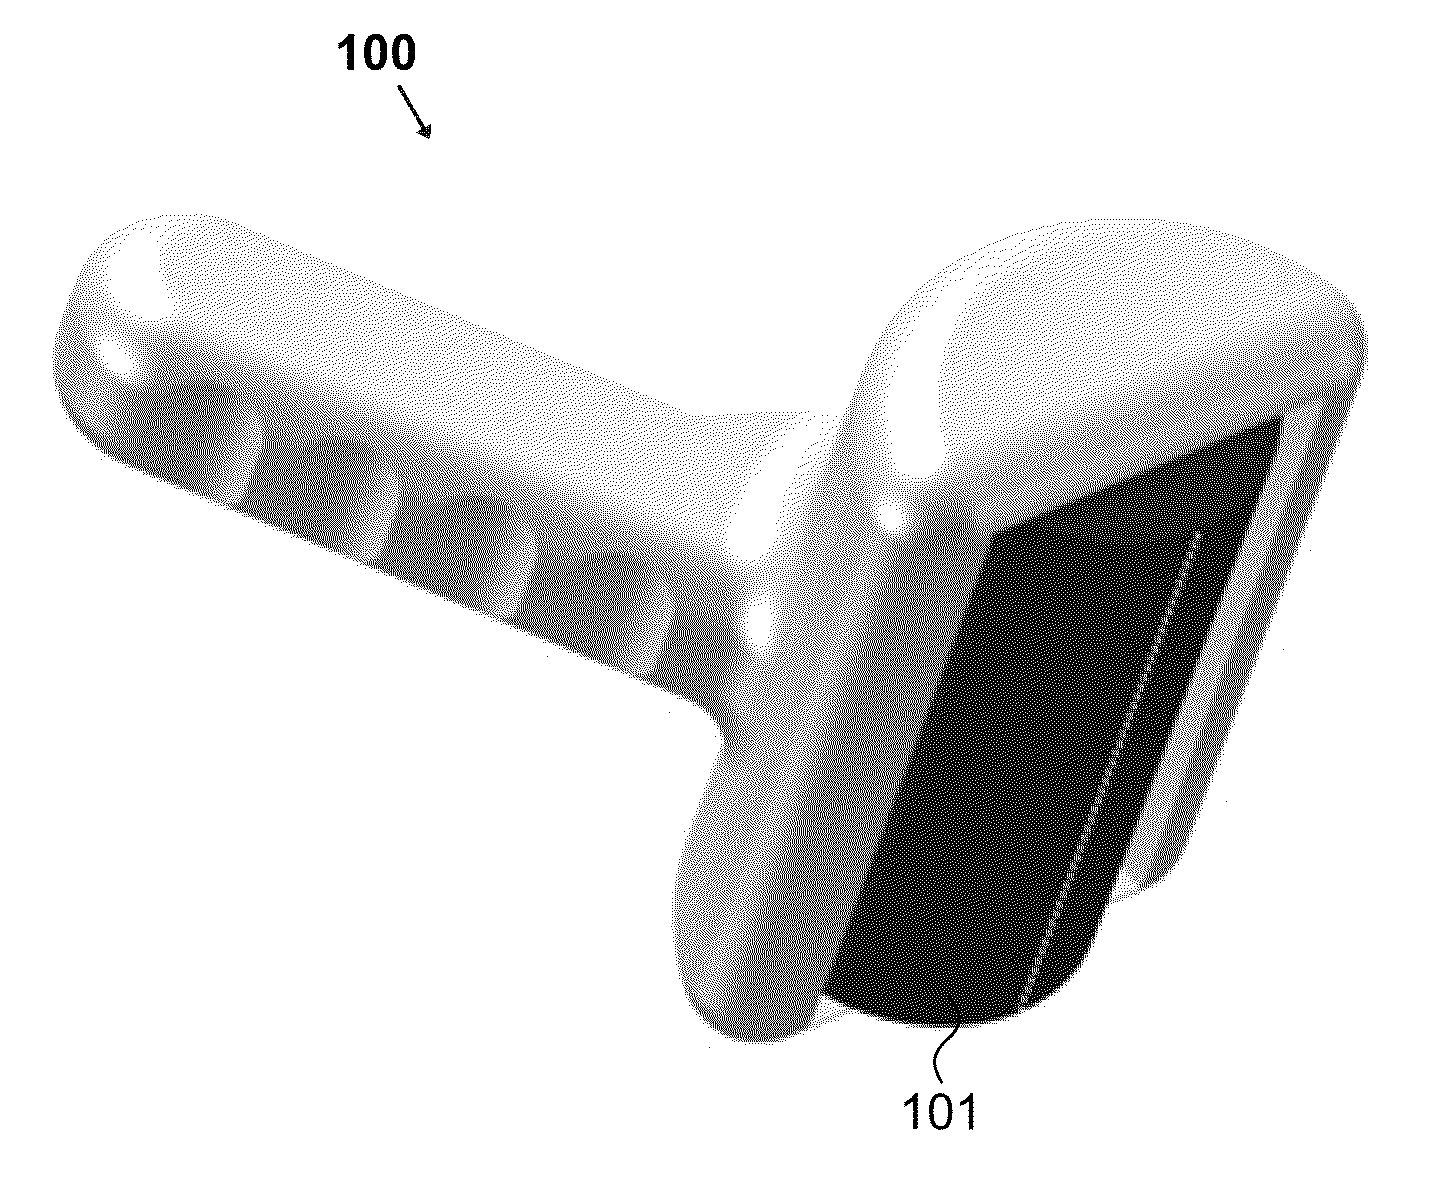 Microneedles, Microneedle Arrays, Methods for Making, and Transdermal and/or Intradermal Applications